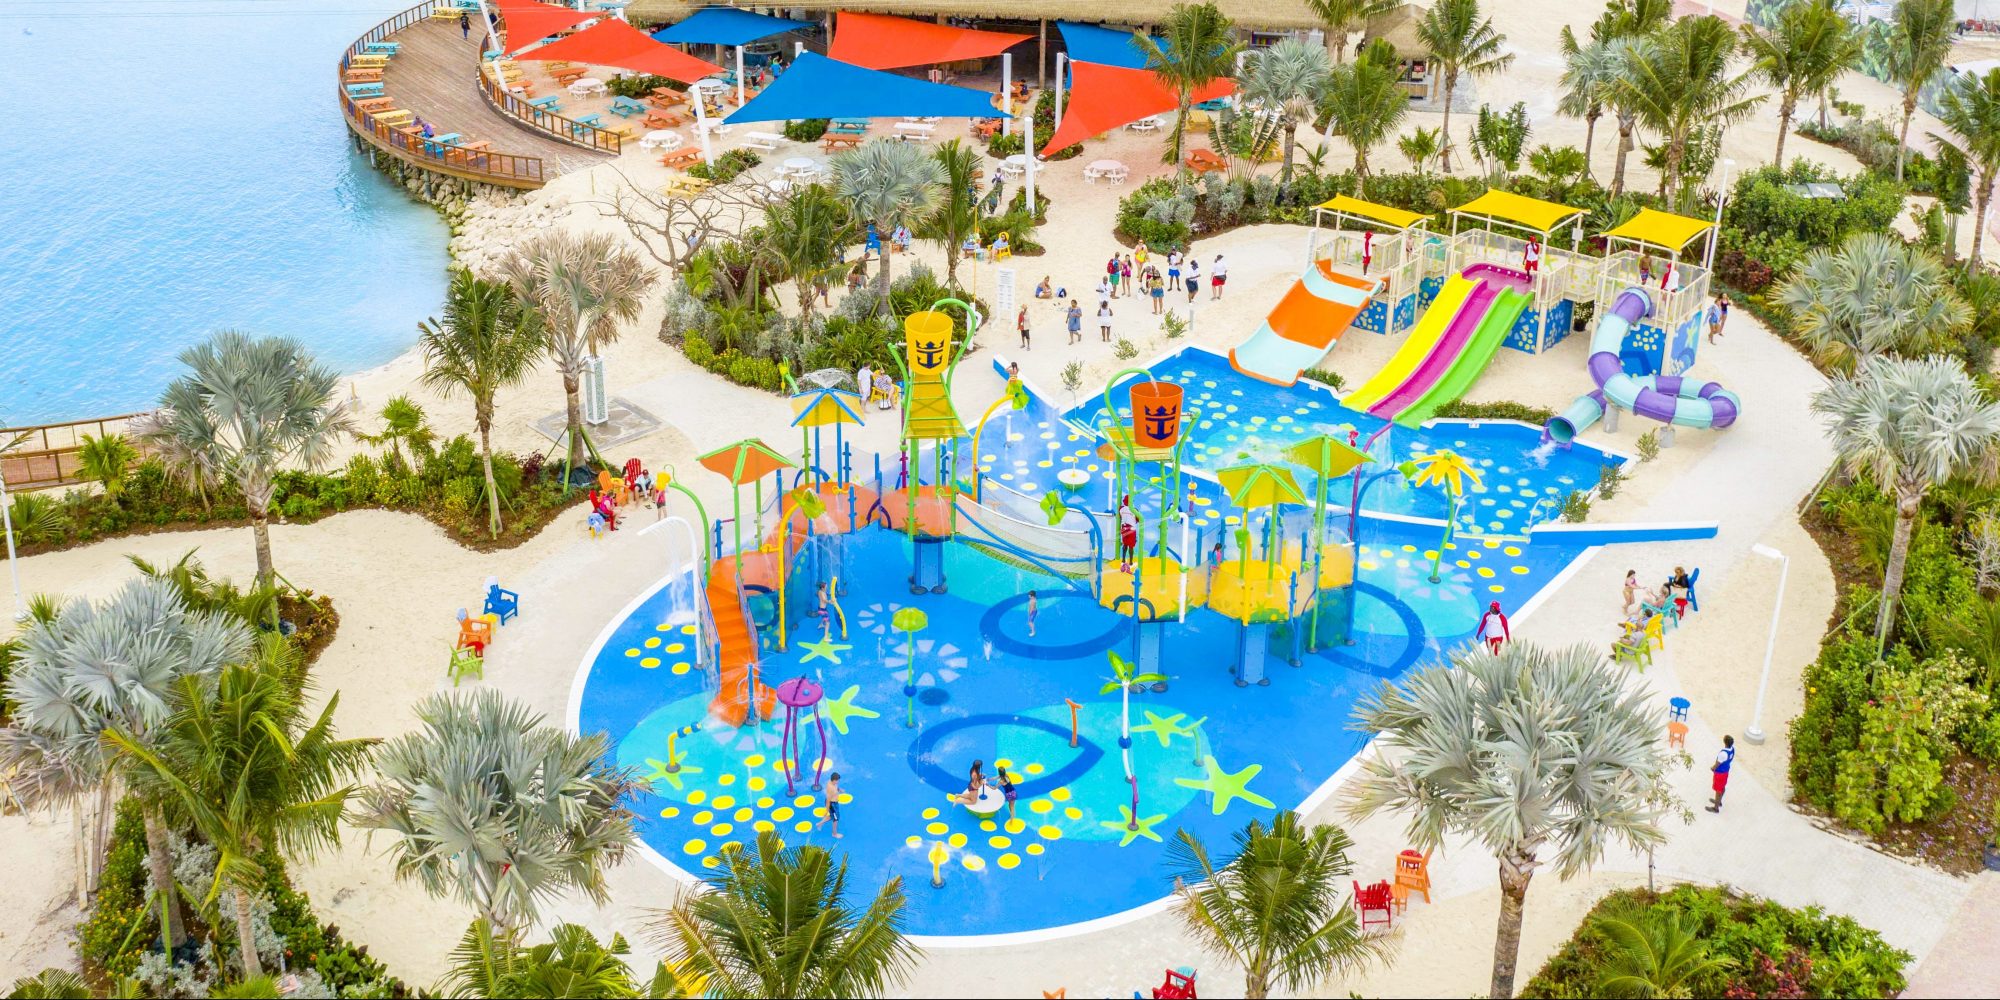 Martin Aquatic’s Projects at Perfect Day at CocoCay Welcome the First Guests